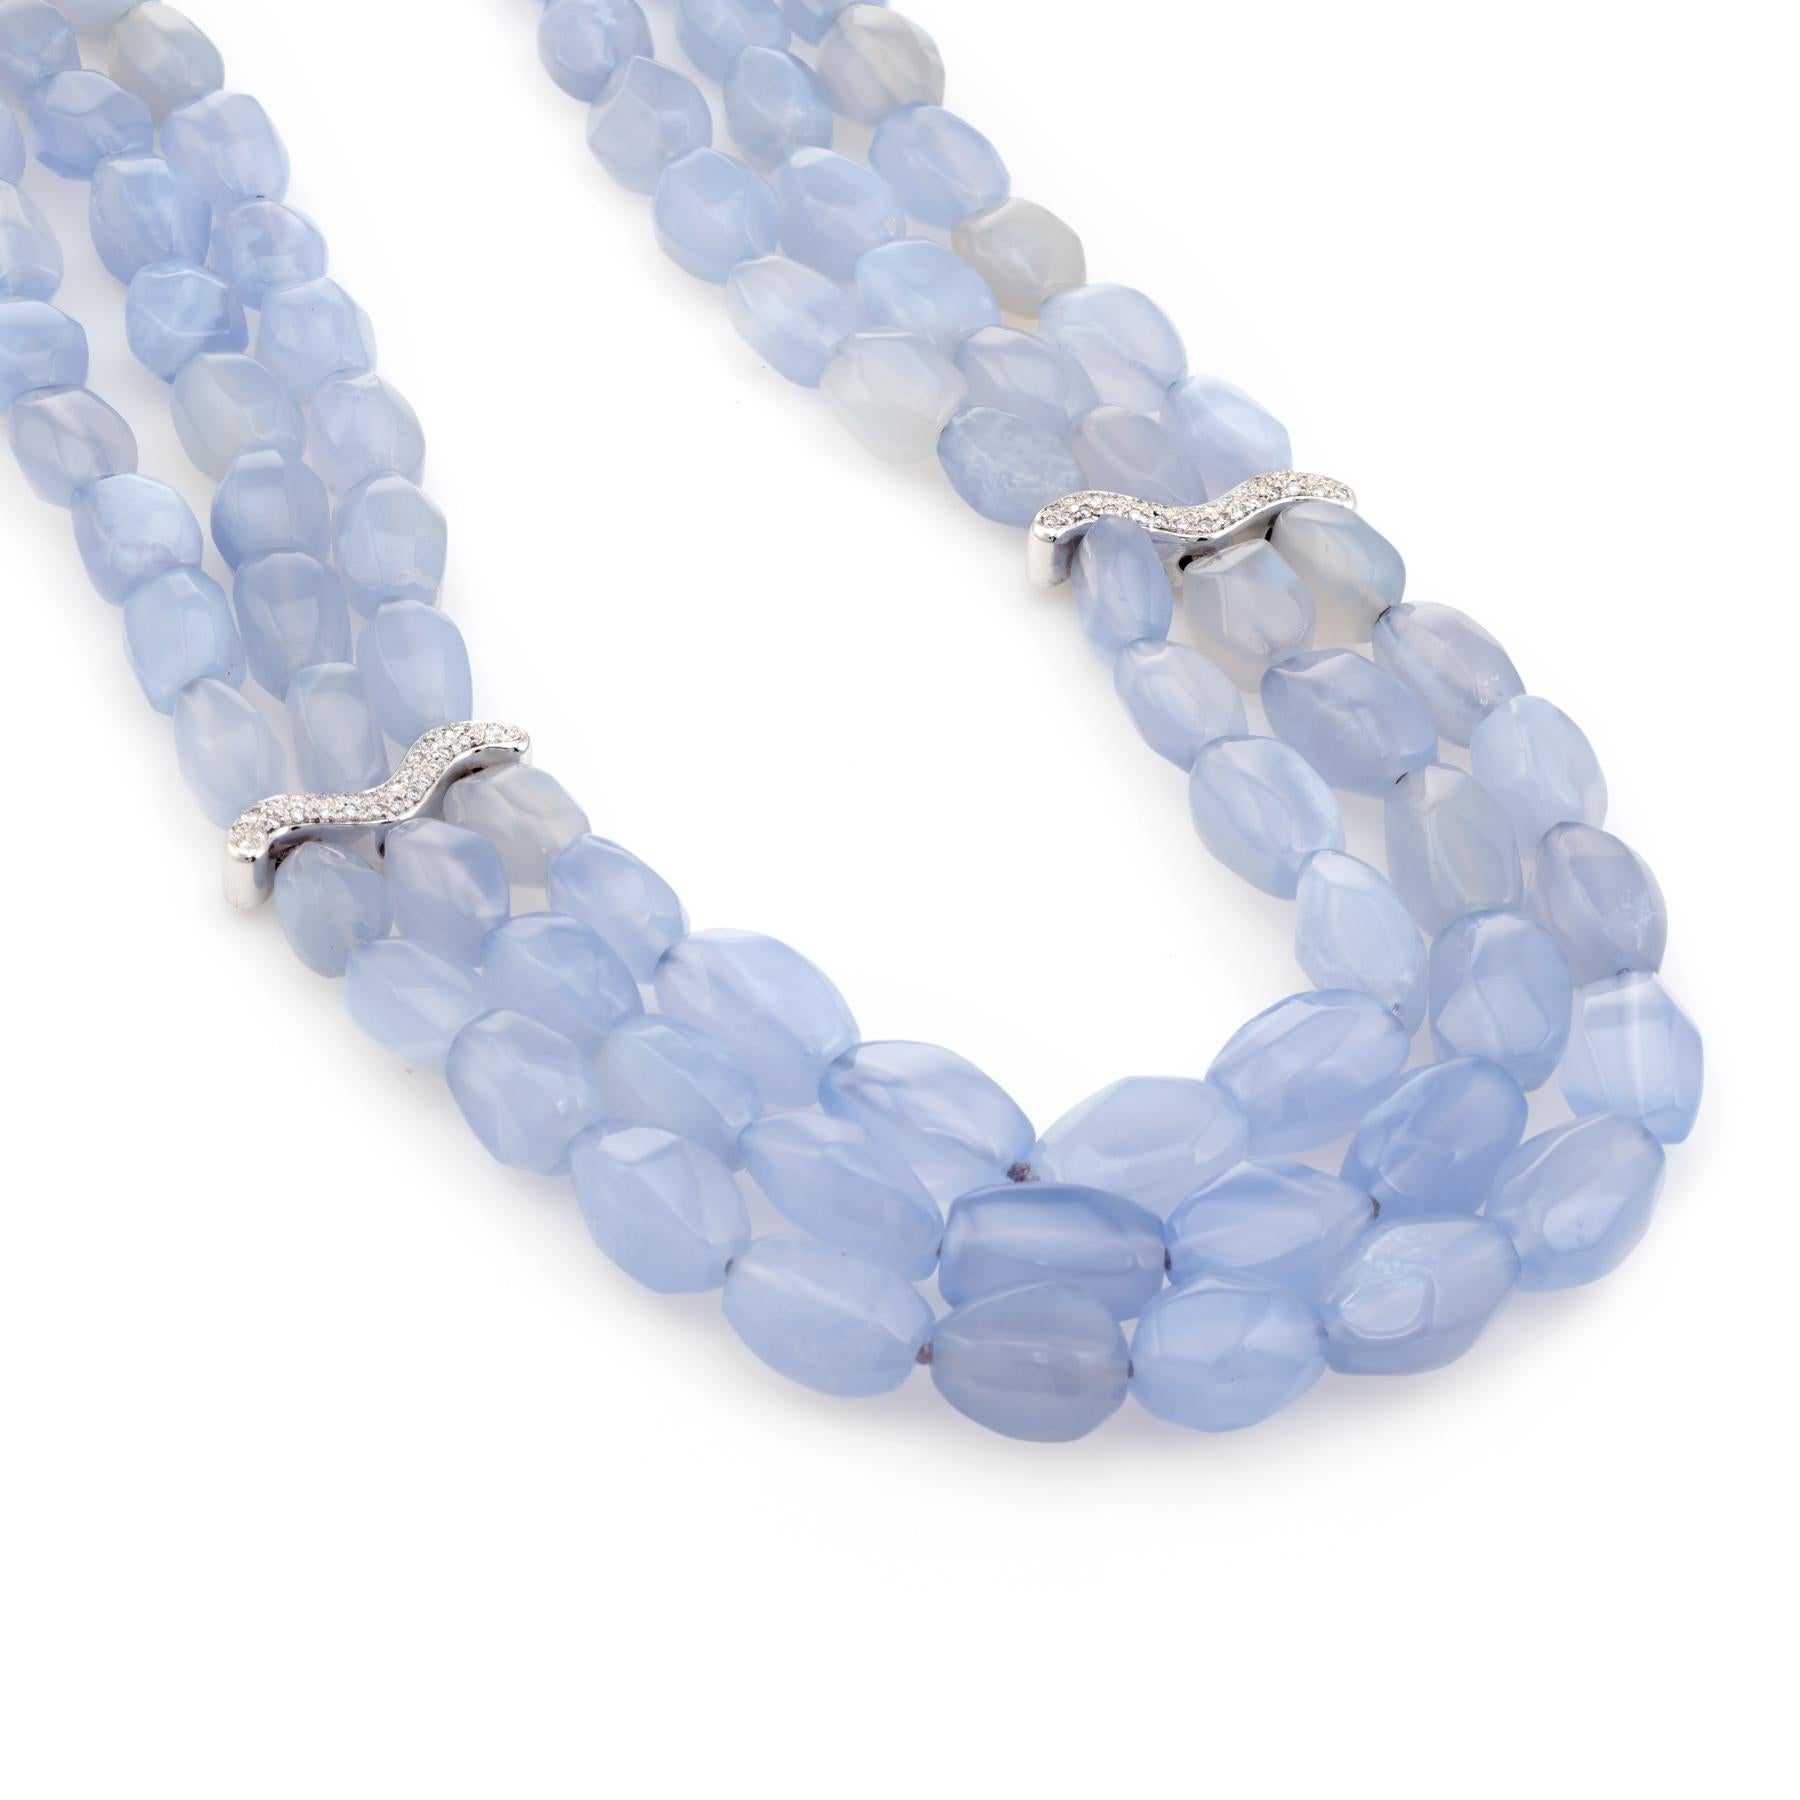 Elegant Antonini 3 strand blue chalcedony & diamond necklace, finished with an 18 karat white gold clasp and separators.  

Polished blue chalcedony measures (average) 13mm x 8mm. The diamonds total an estimated 0.60 carats (estimated at G-H color